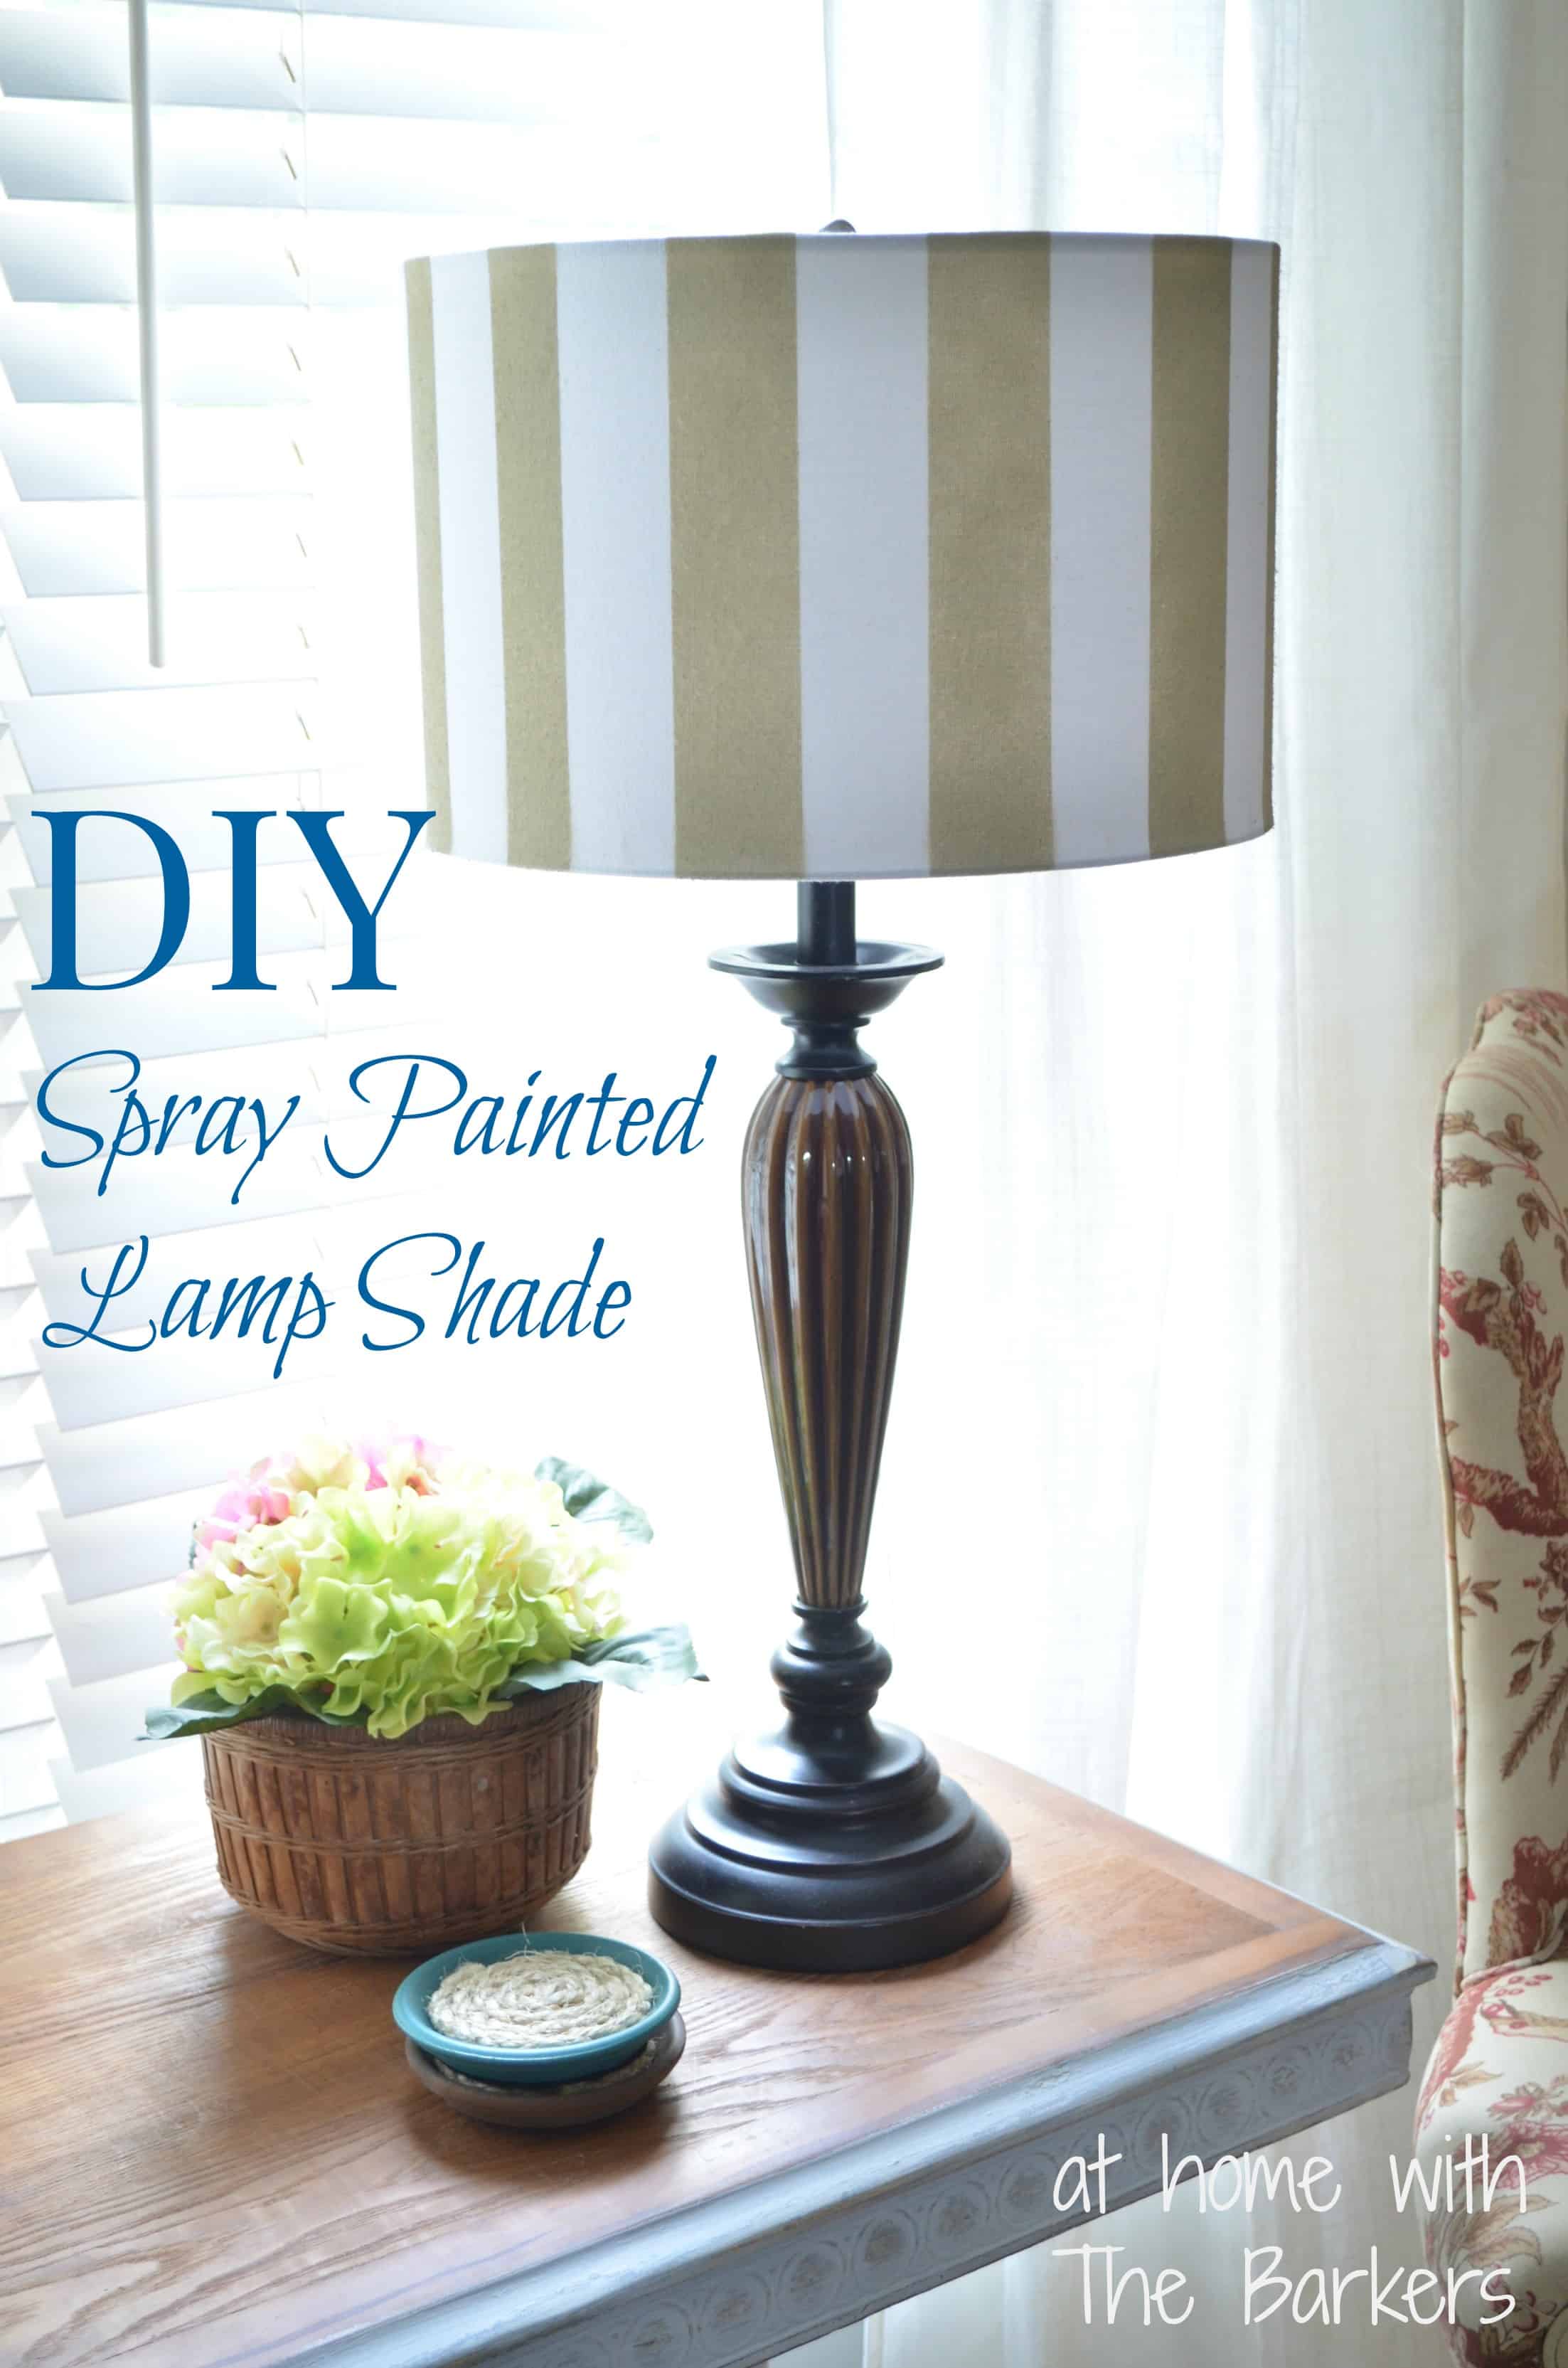 Diy Spray Painted Lamp Shade At Home, Best Paint To Use On Fabric Lampshade